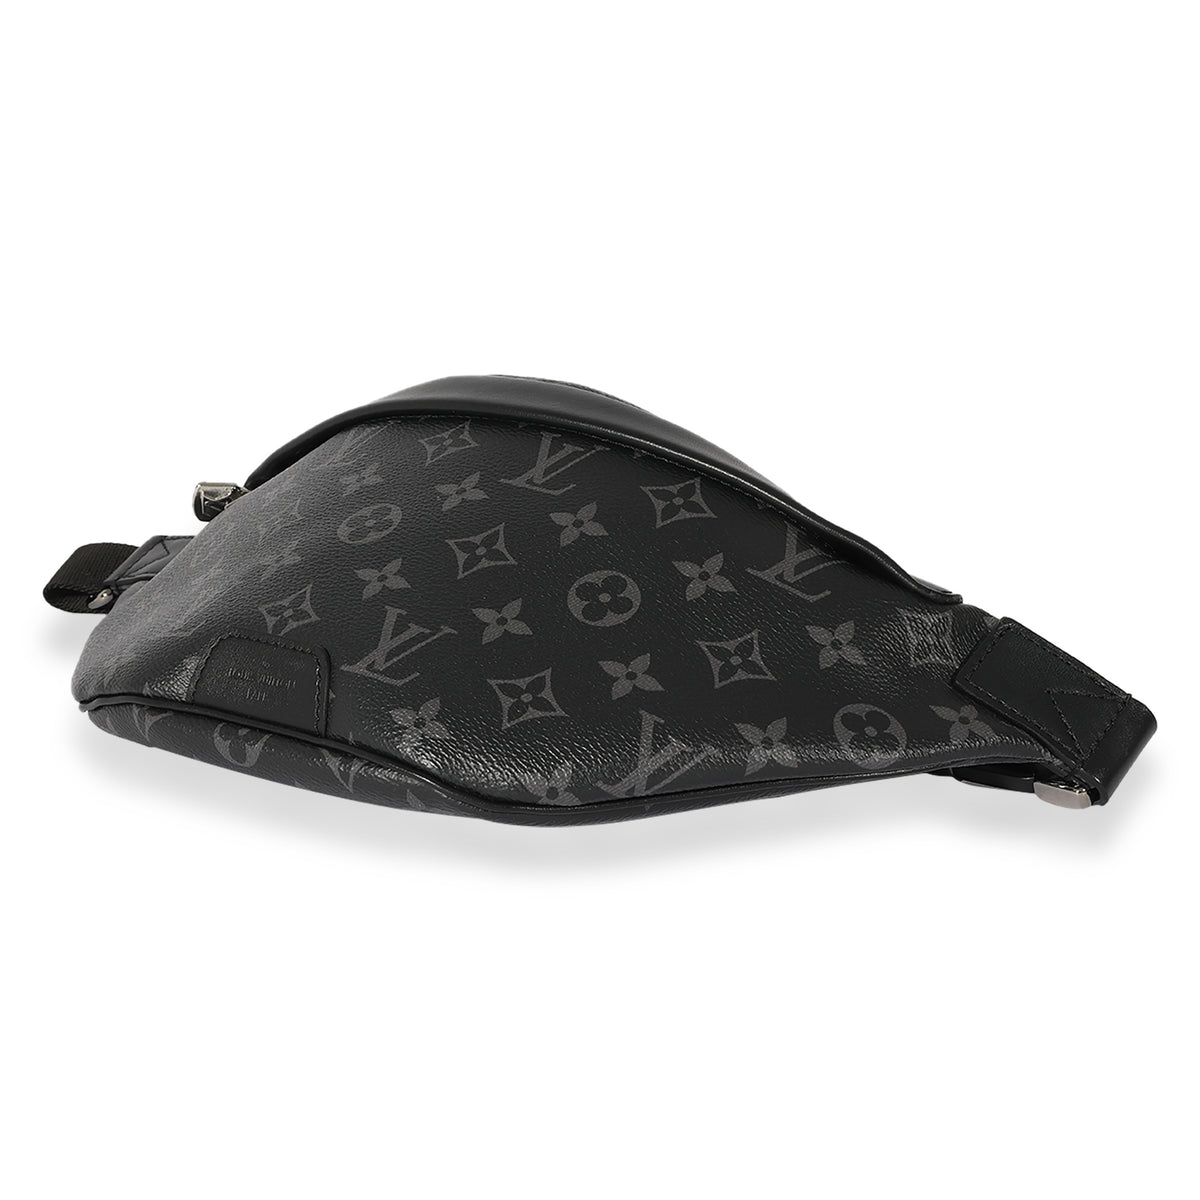 Louis Vuitton, Bags, Louis Vuitton Lv Extra Large Shopping Tote Bag  Crossbody Bag With Pvc Bag Twilly